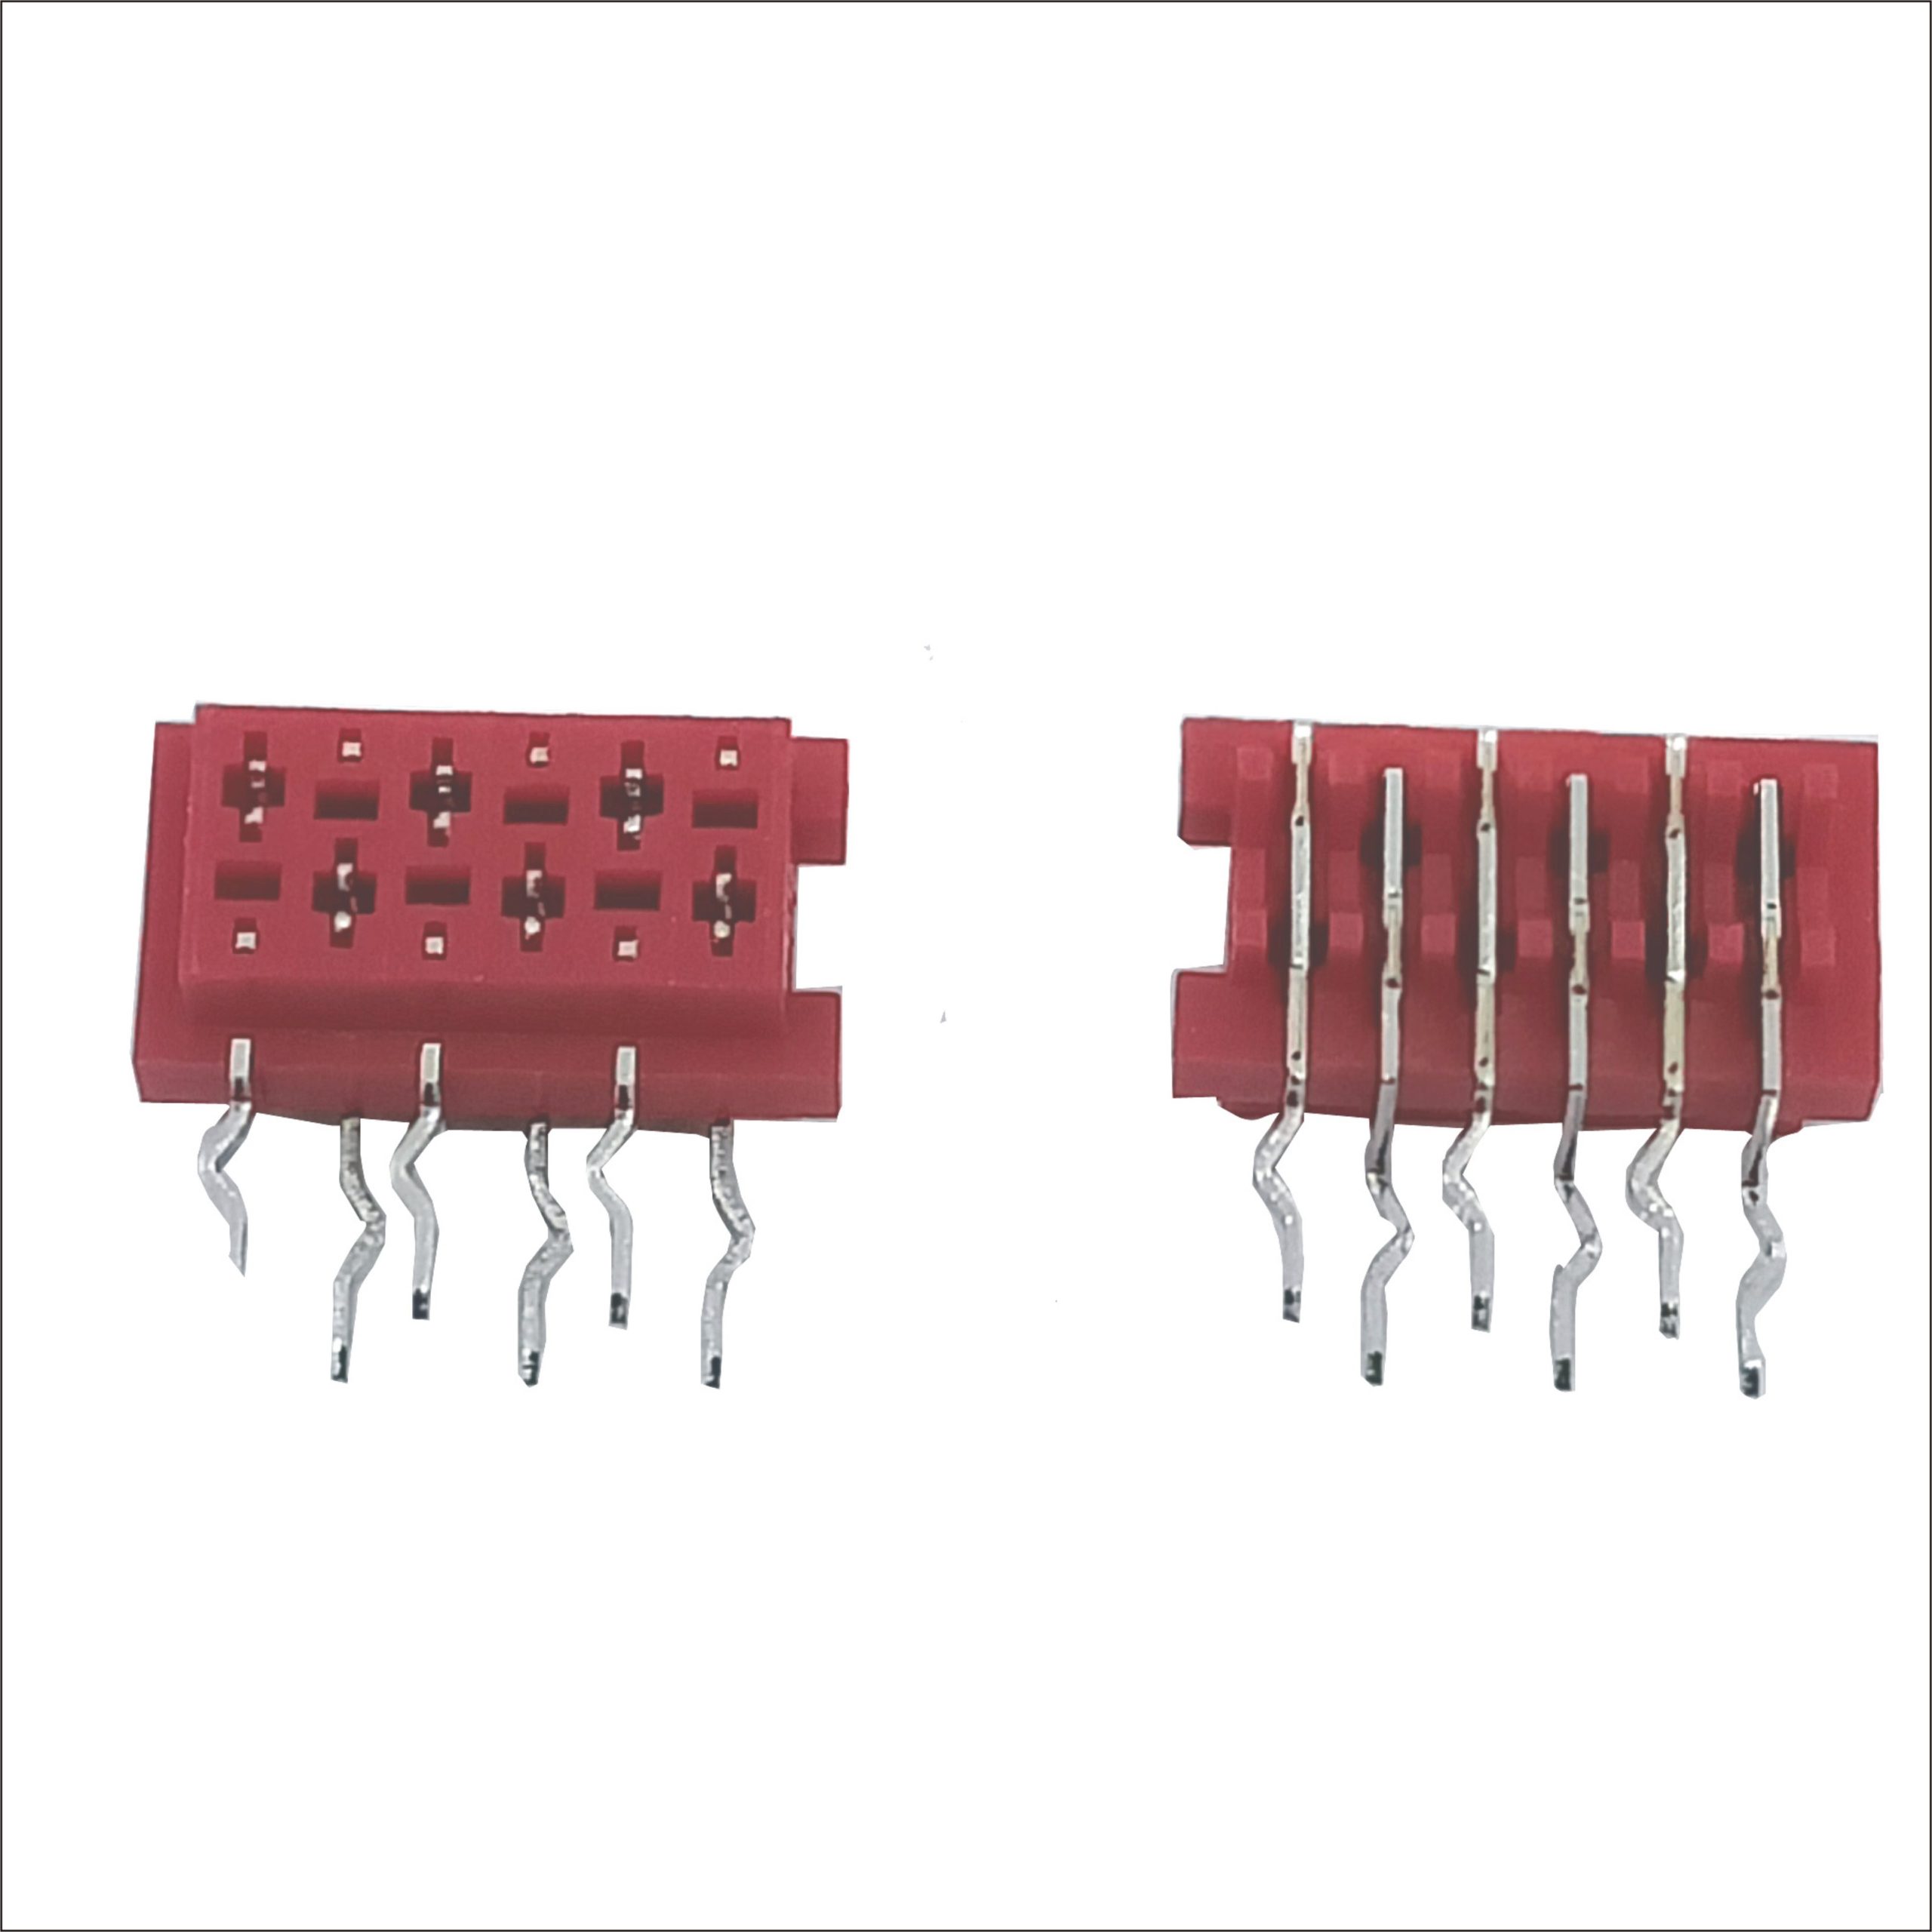 Micro-MaTch 7-215460-6 Ribbon Cable Connectors: Unleashing Precision in Cable-to-Board Connectivity